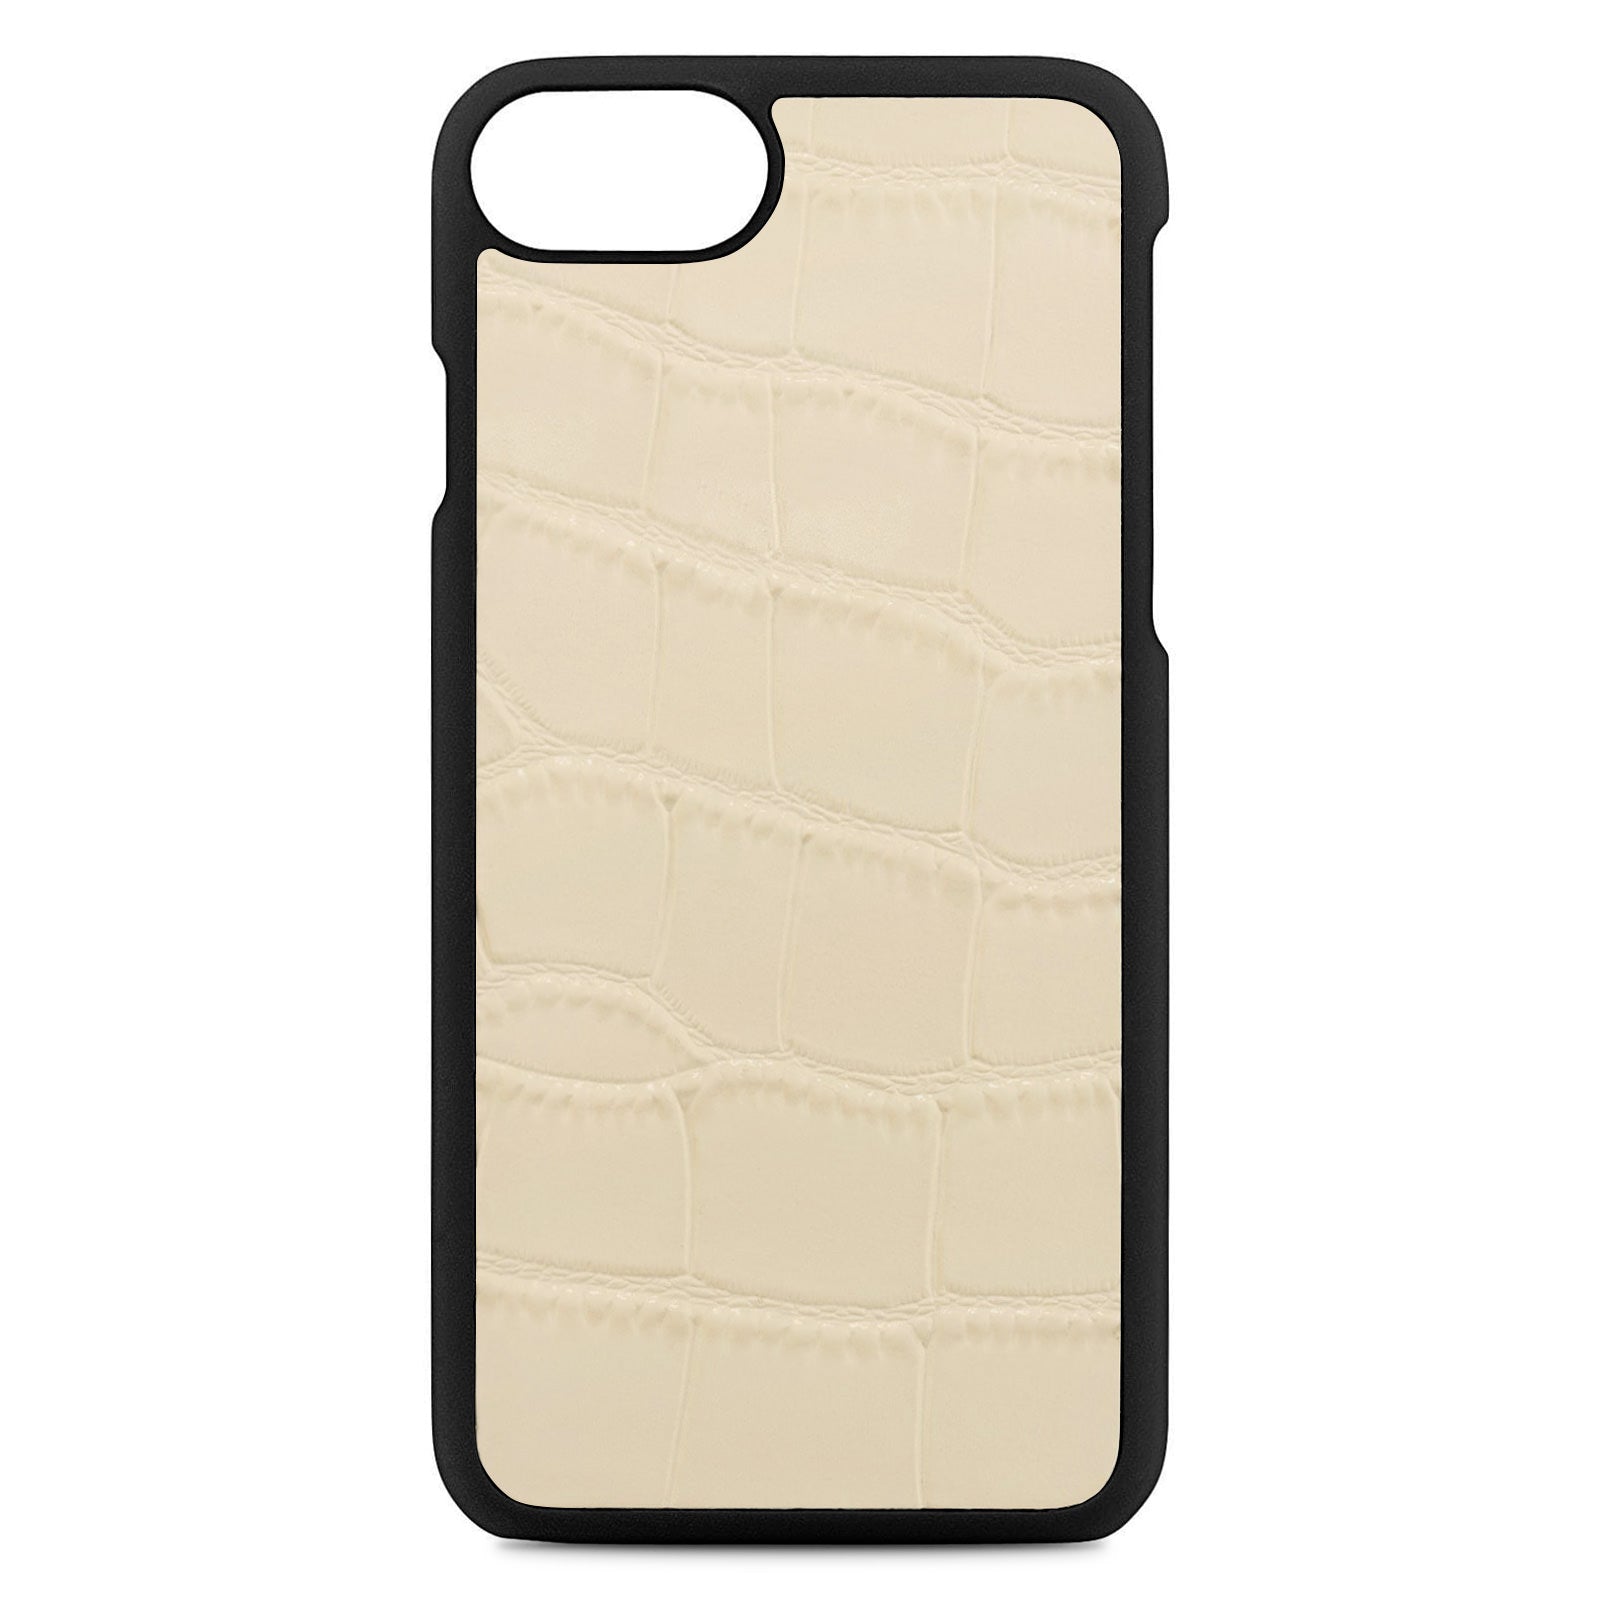 Blank Personalised Ivory Croc Leather iPhone Case